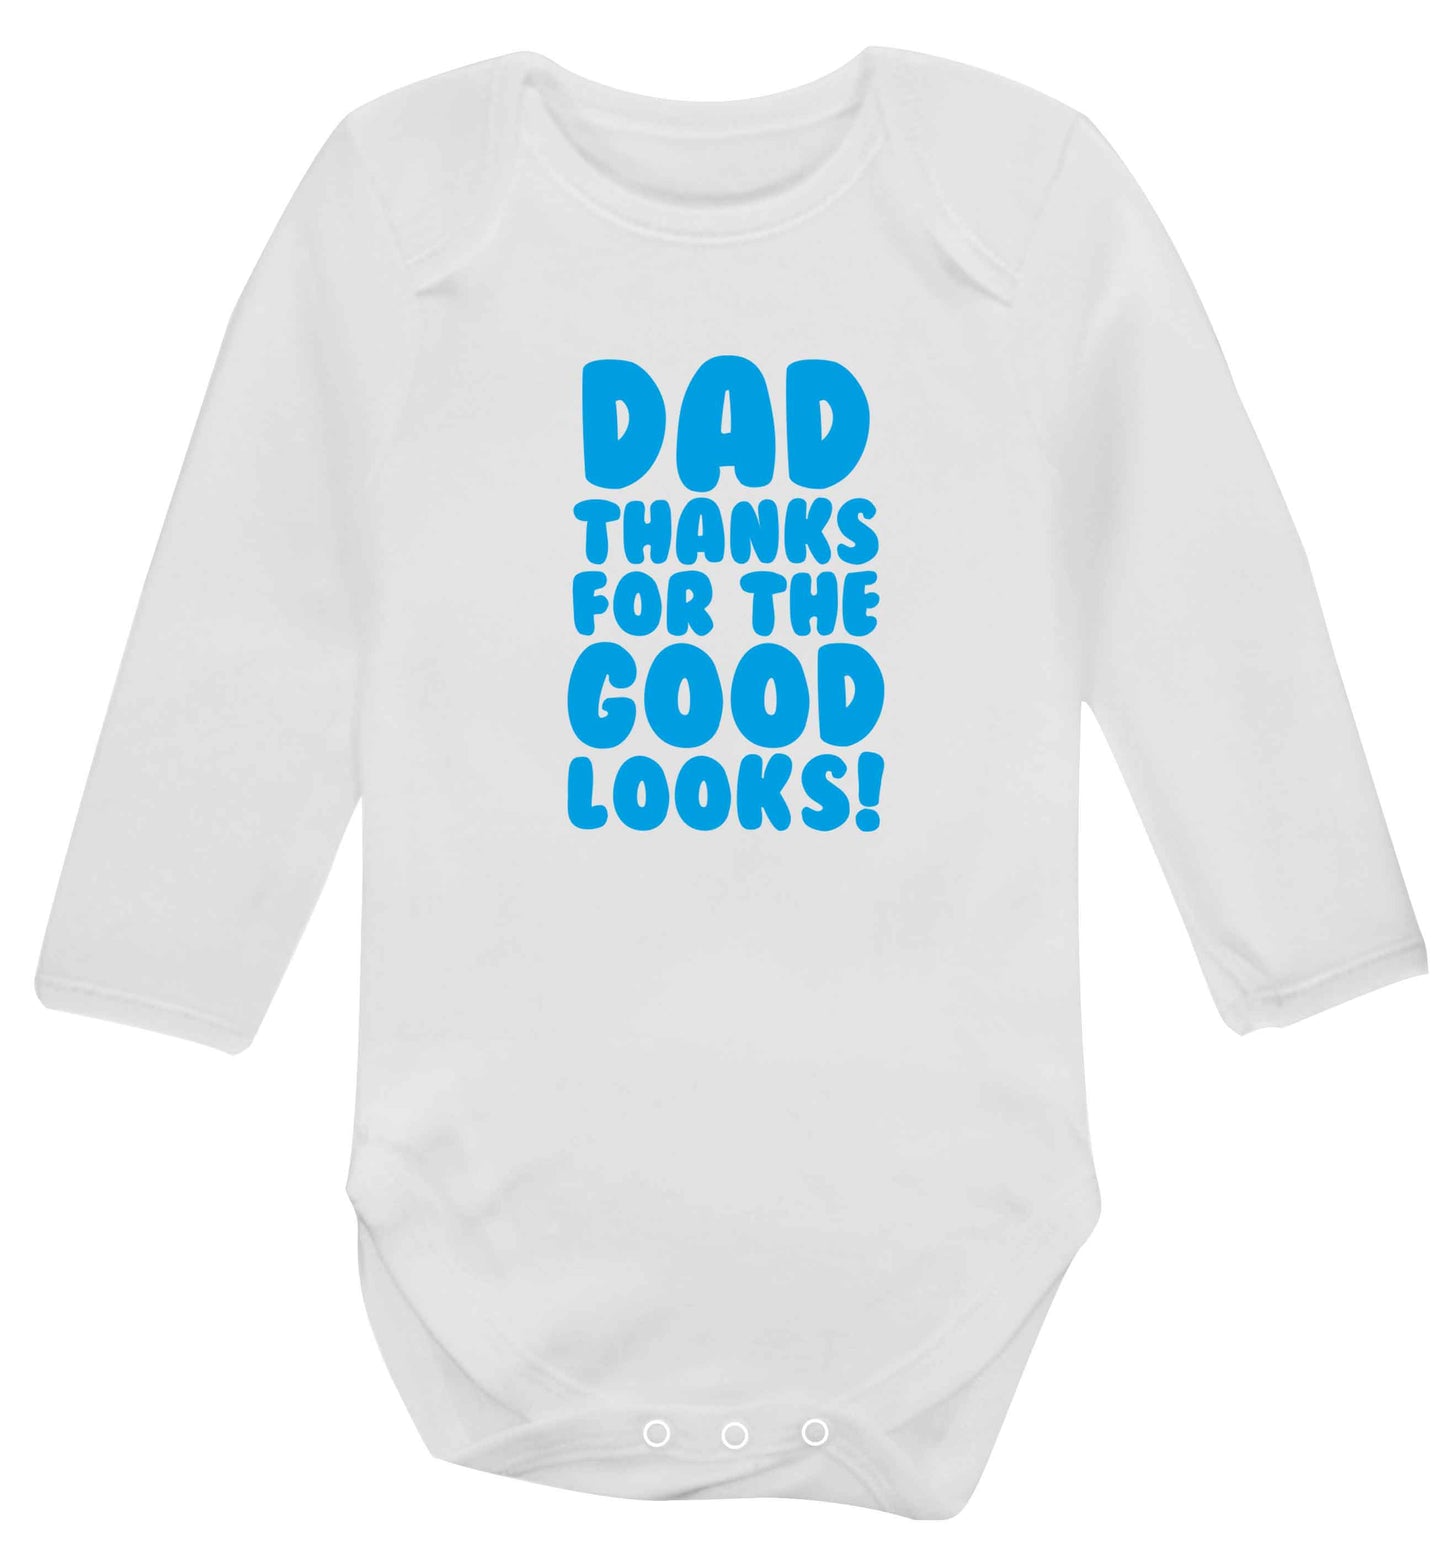 Dad thanks for the good looks baby vest long sleeved white 6-12 months